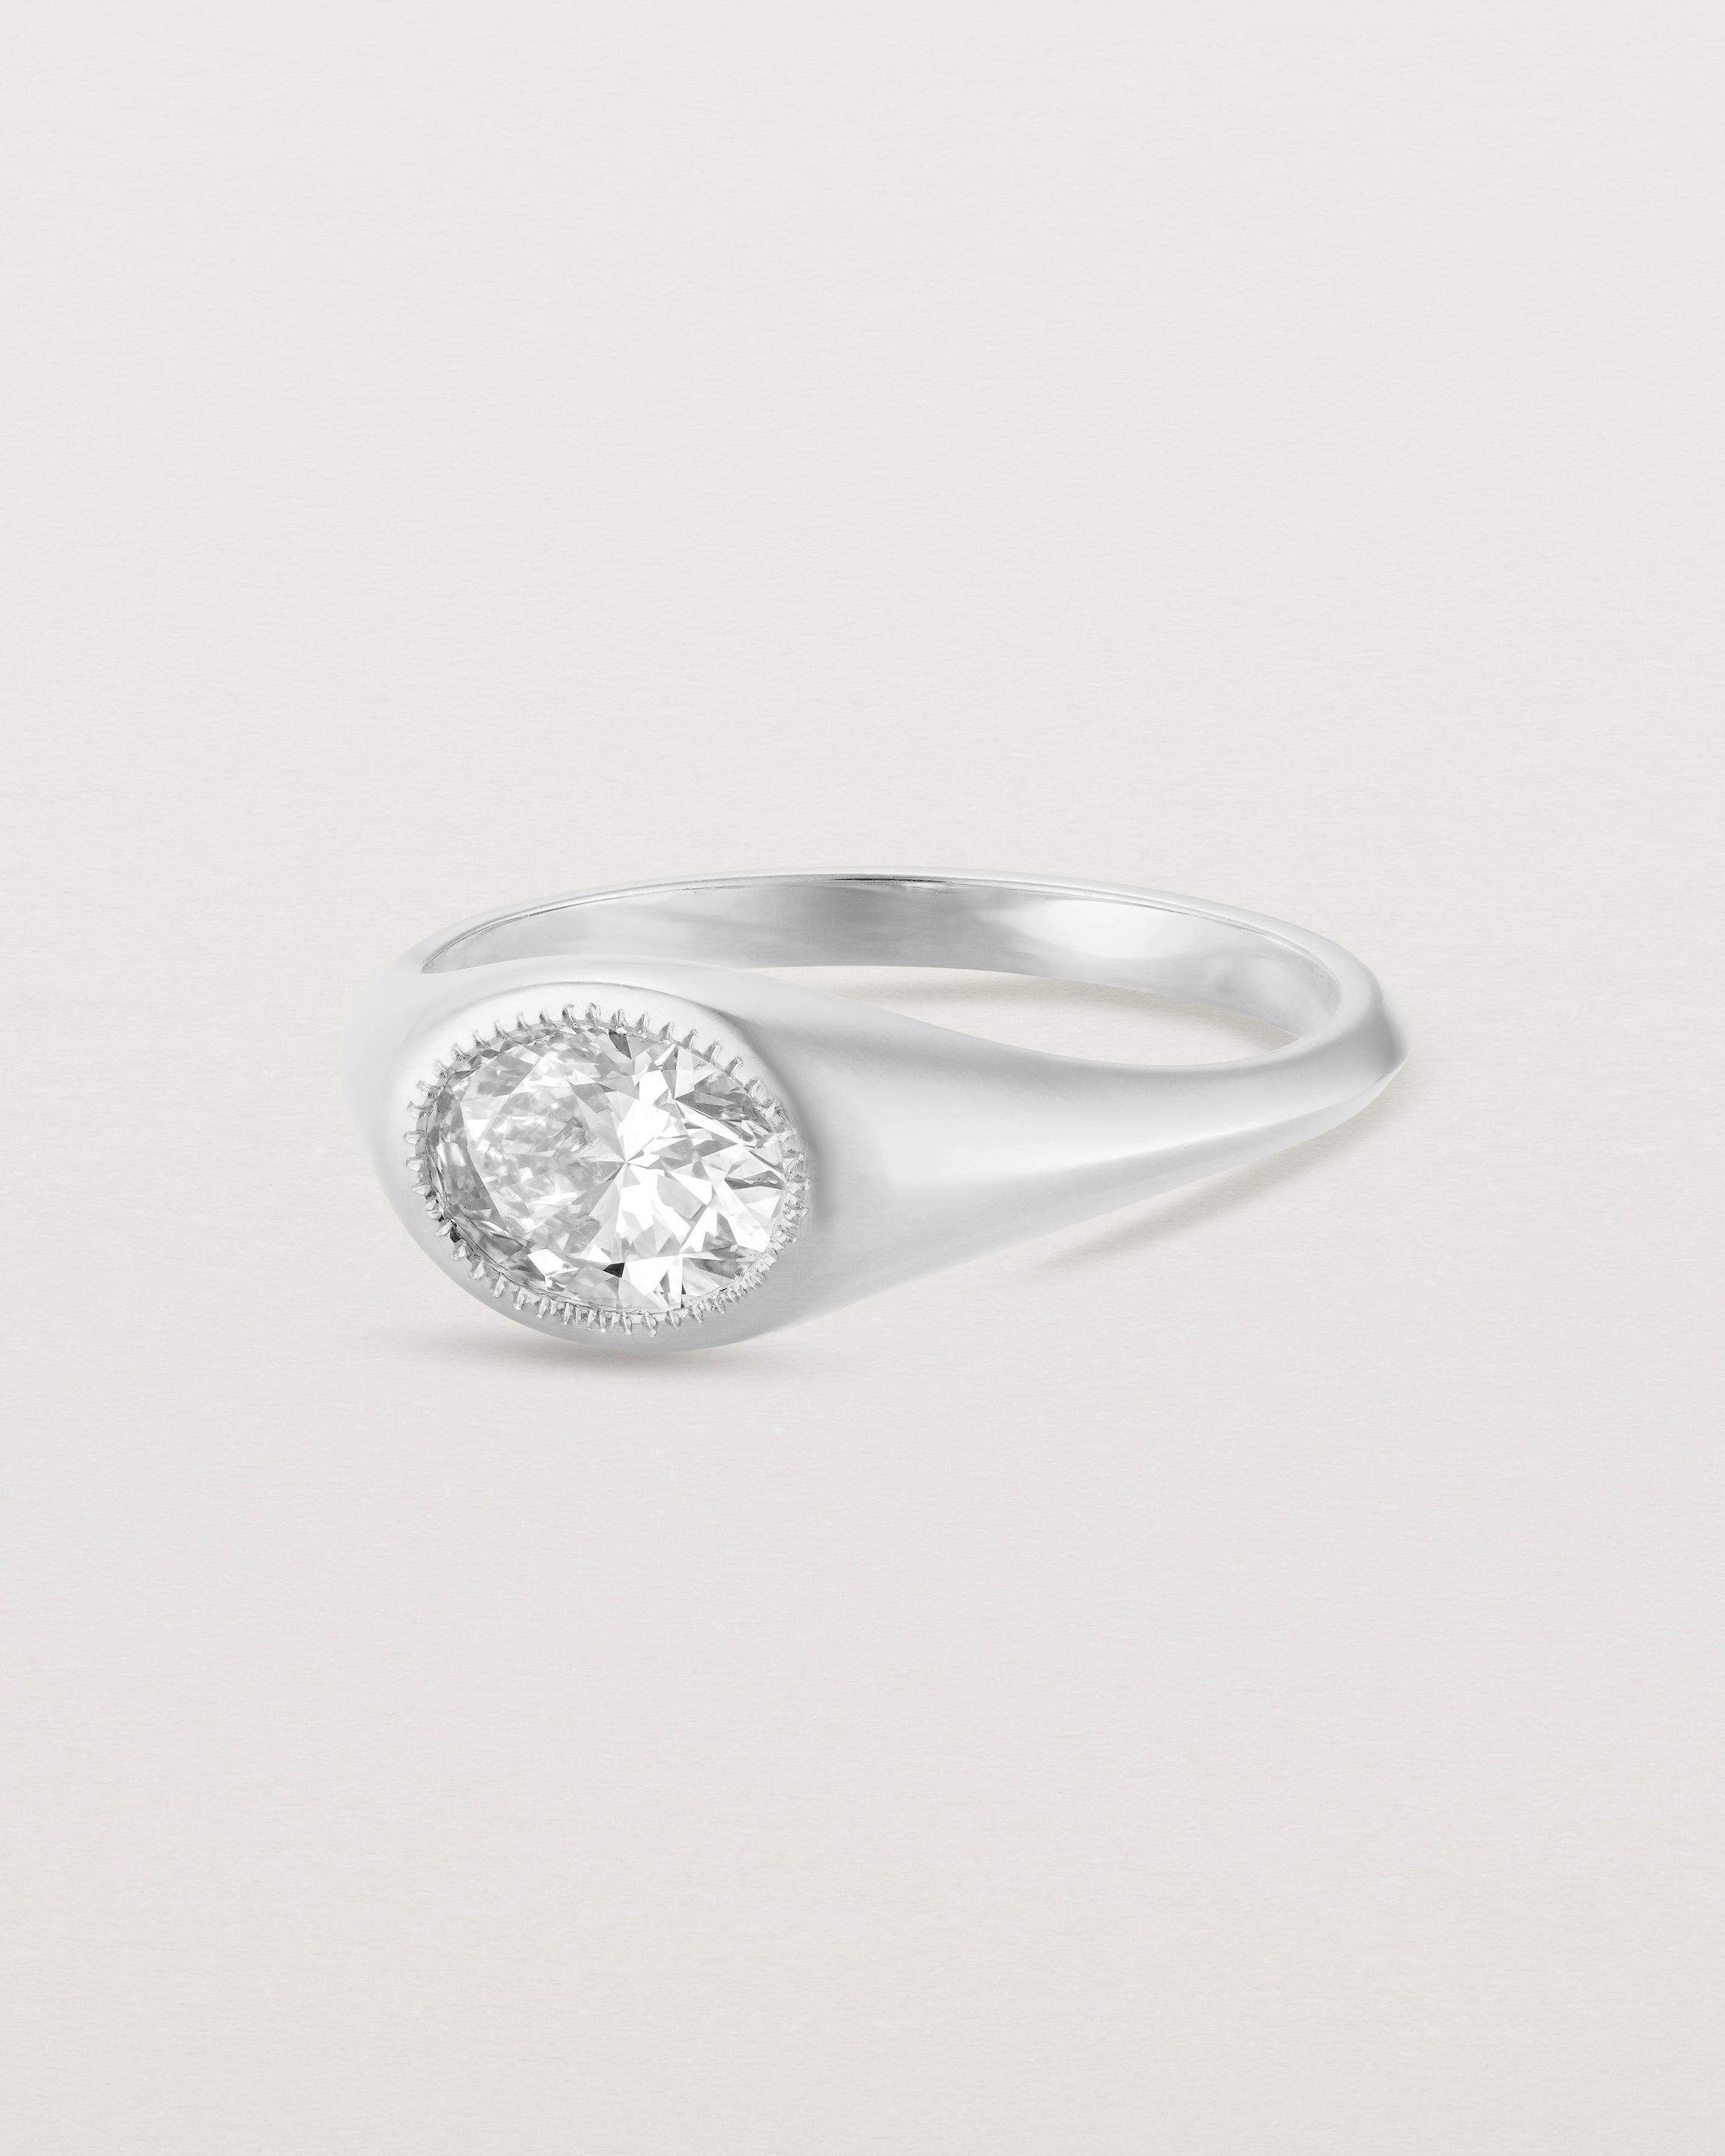 Angled view of the Átlas Oval Signet | Laboratory Grown Diamond in white gold, with a polished finish.